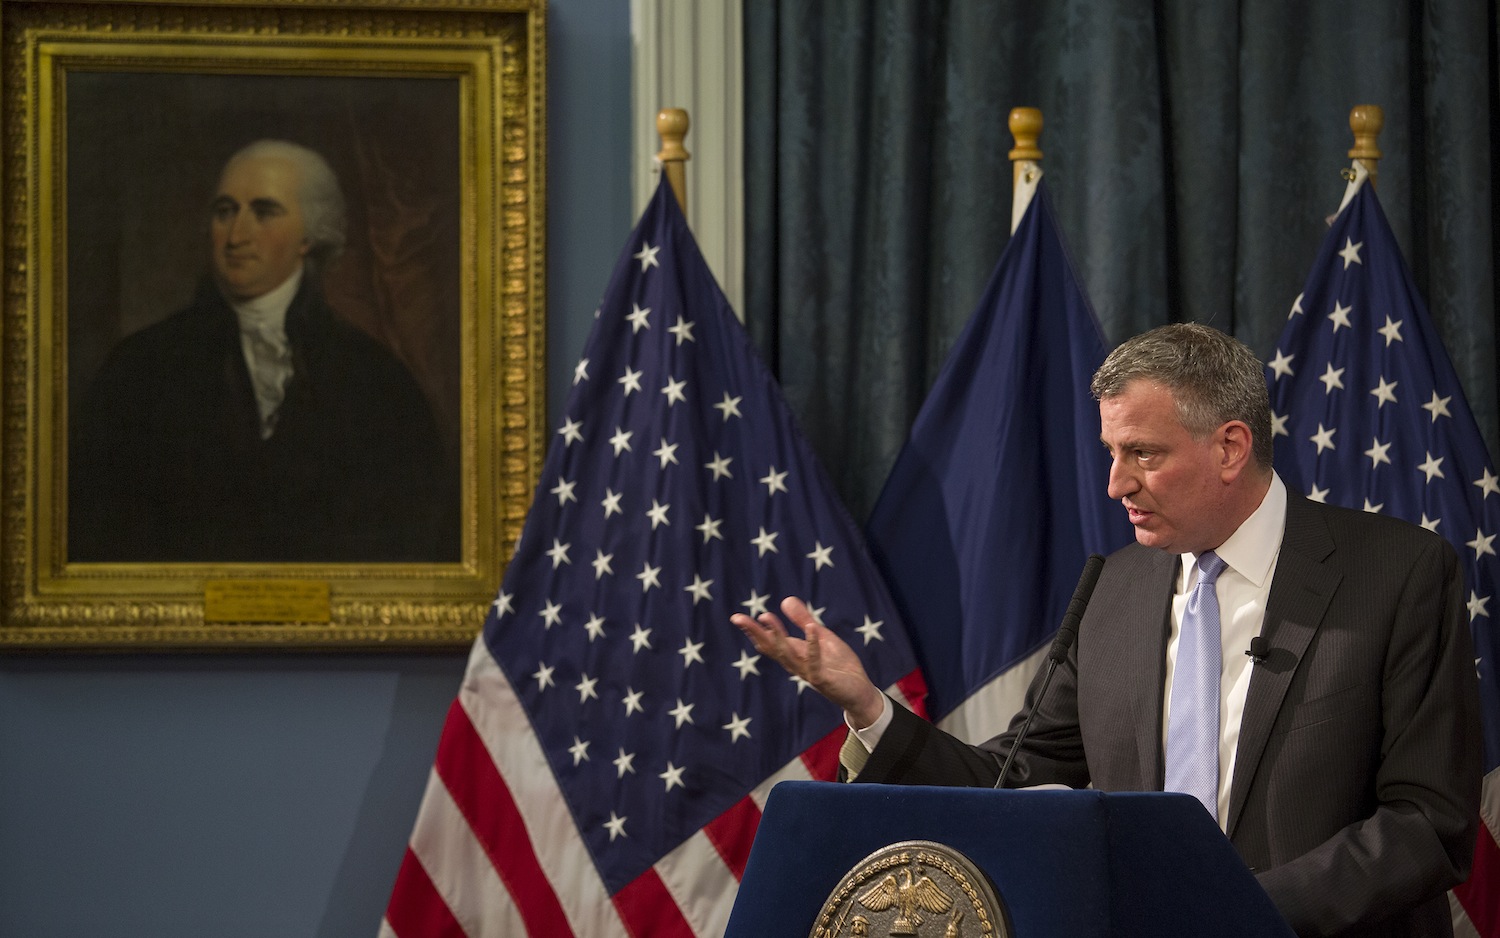 What Do de Blasio’s Lackluster Poll Numbers Really Tell Us?